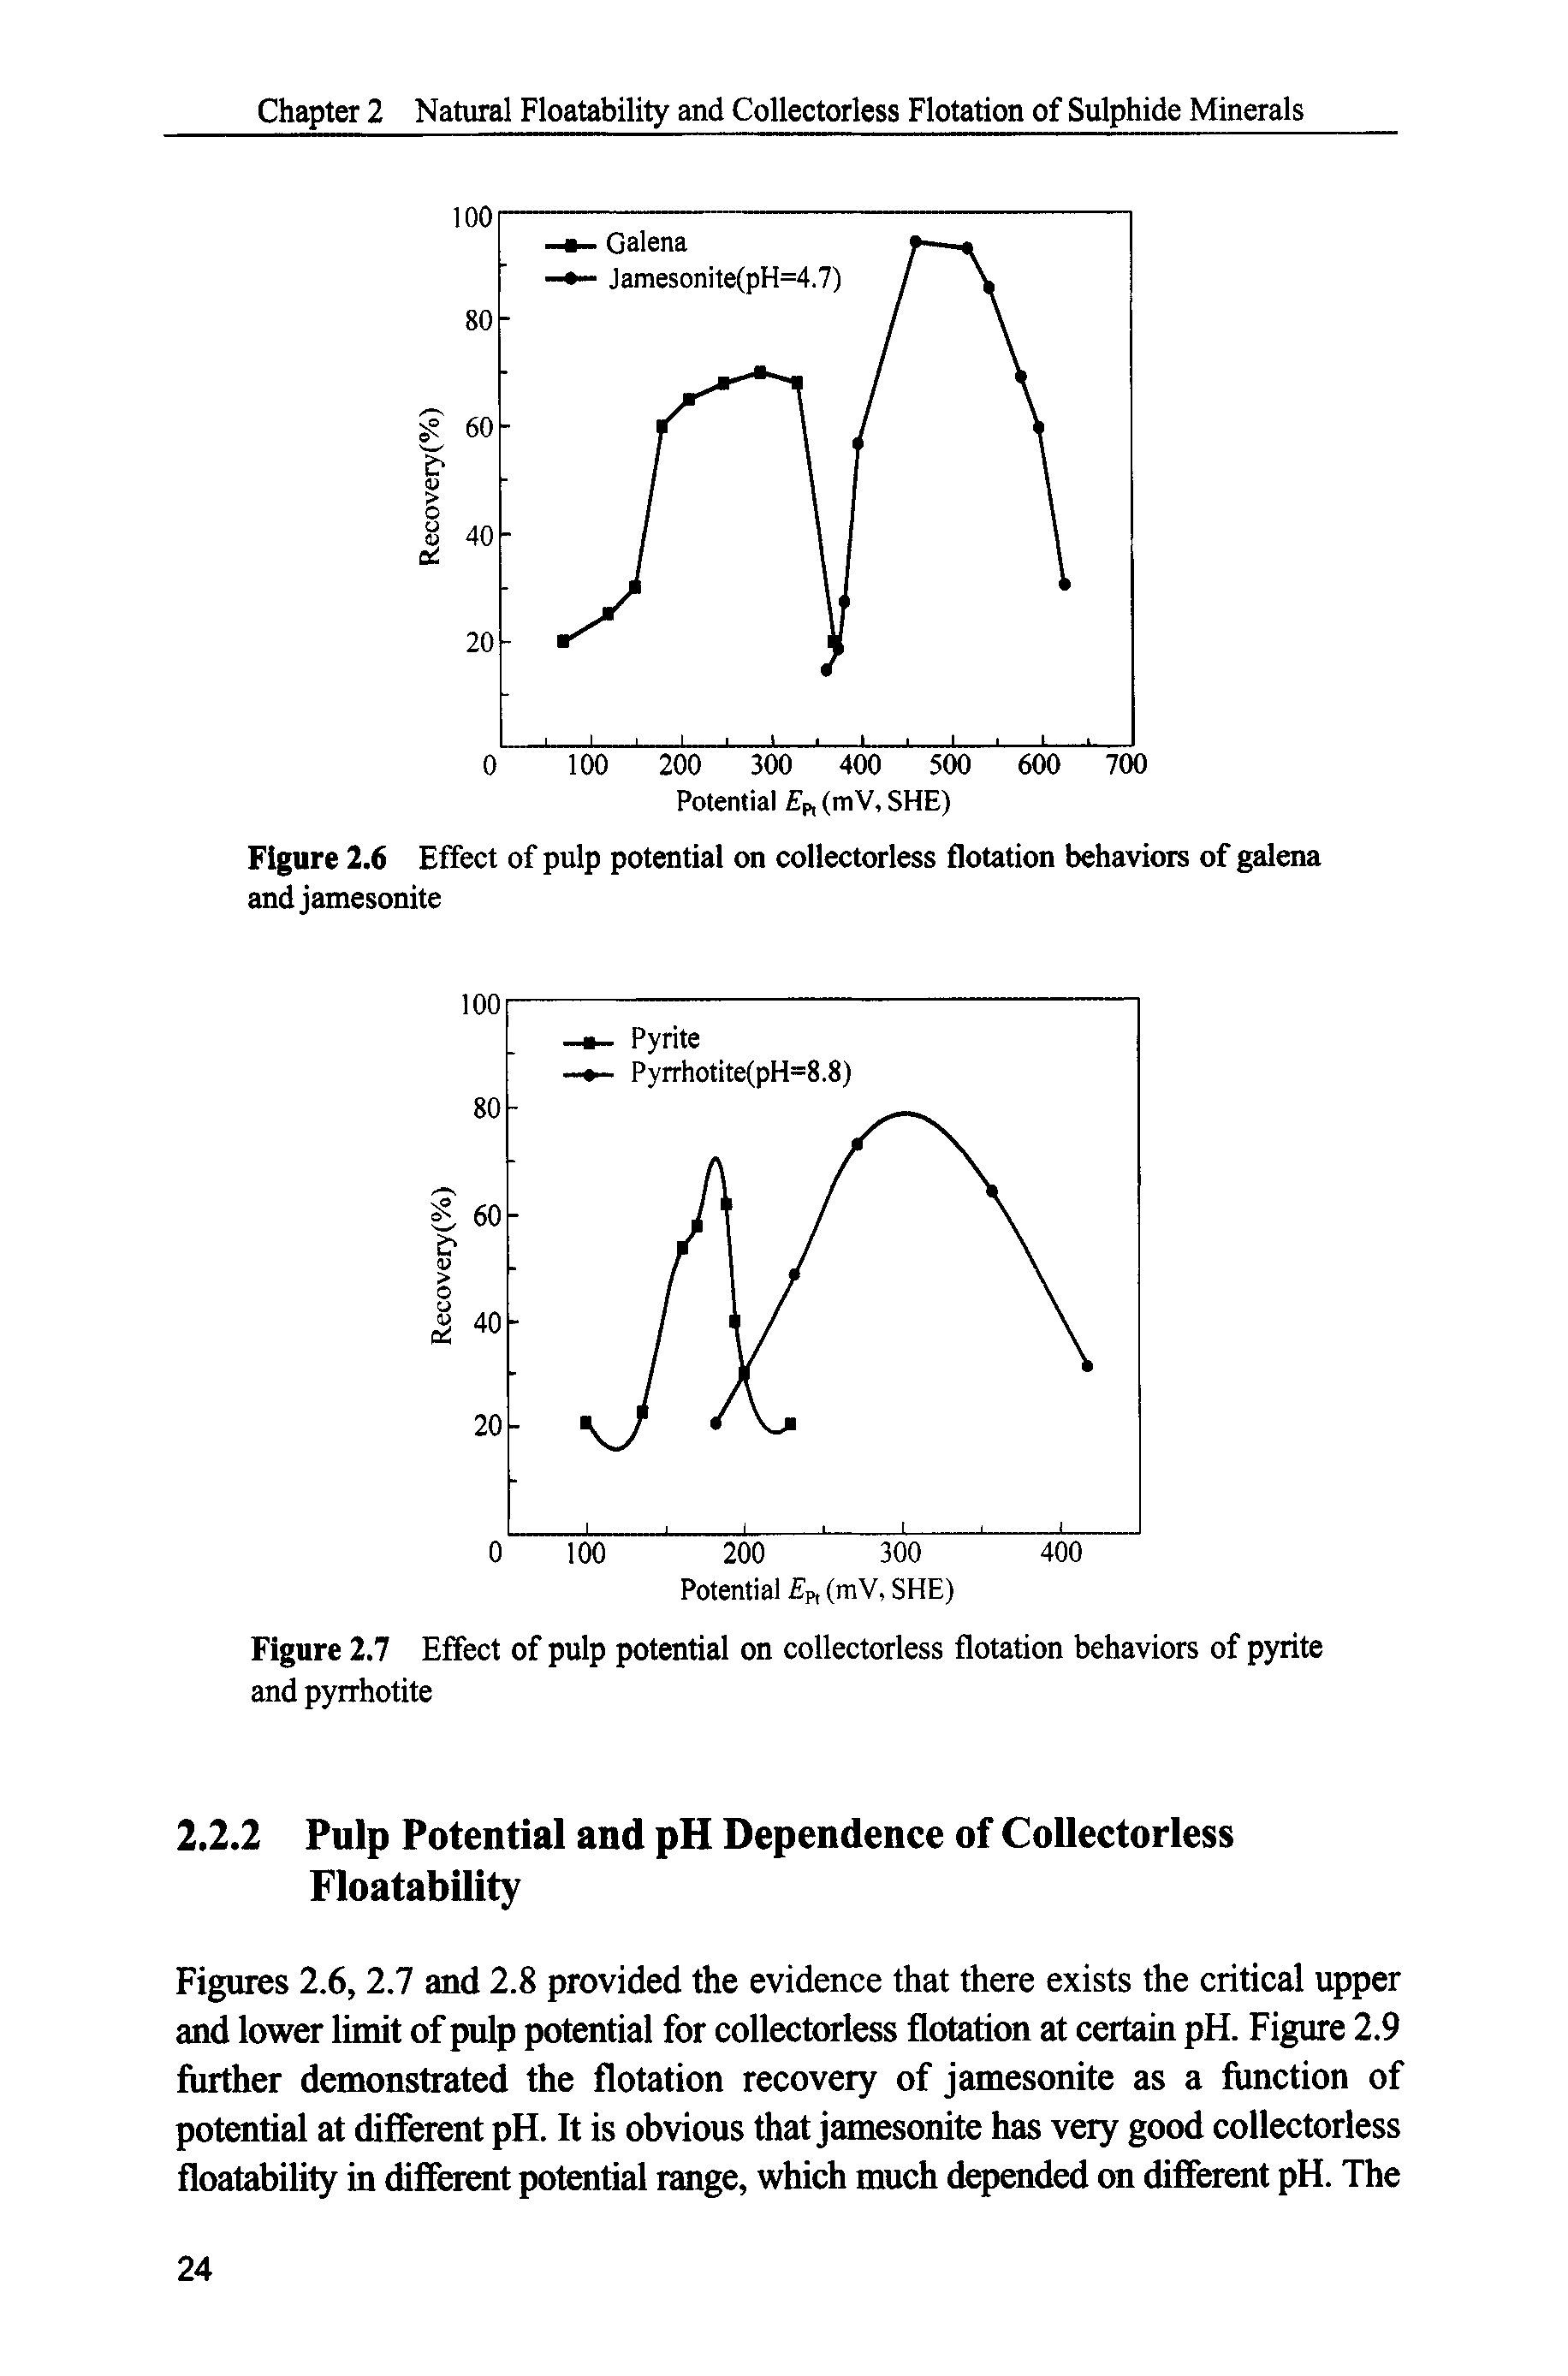 Figures 2.6, 2.7 and 2.8 provided the evidence that there exists the critical upper and lower limit of pulp potential for collectorless flotation at certain pH. Figure 2.9 further demonstrated the flotation recovery of jamesonite as a function of potential at different pH. It is obvious that jamesonite has very good collectorless floatability in different potential range, which much depended on different pH. The...